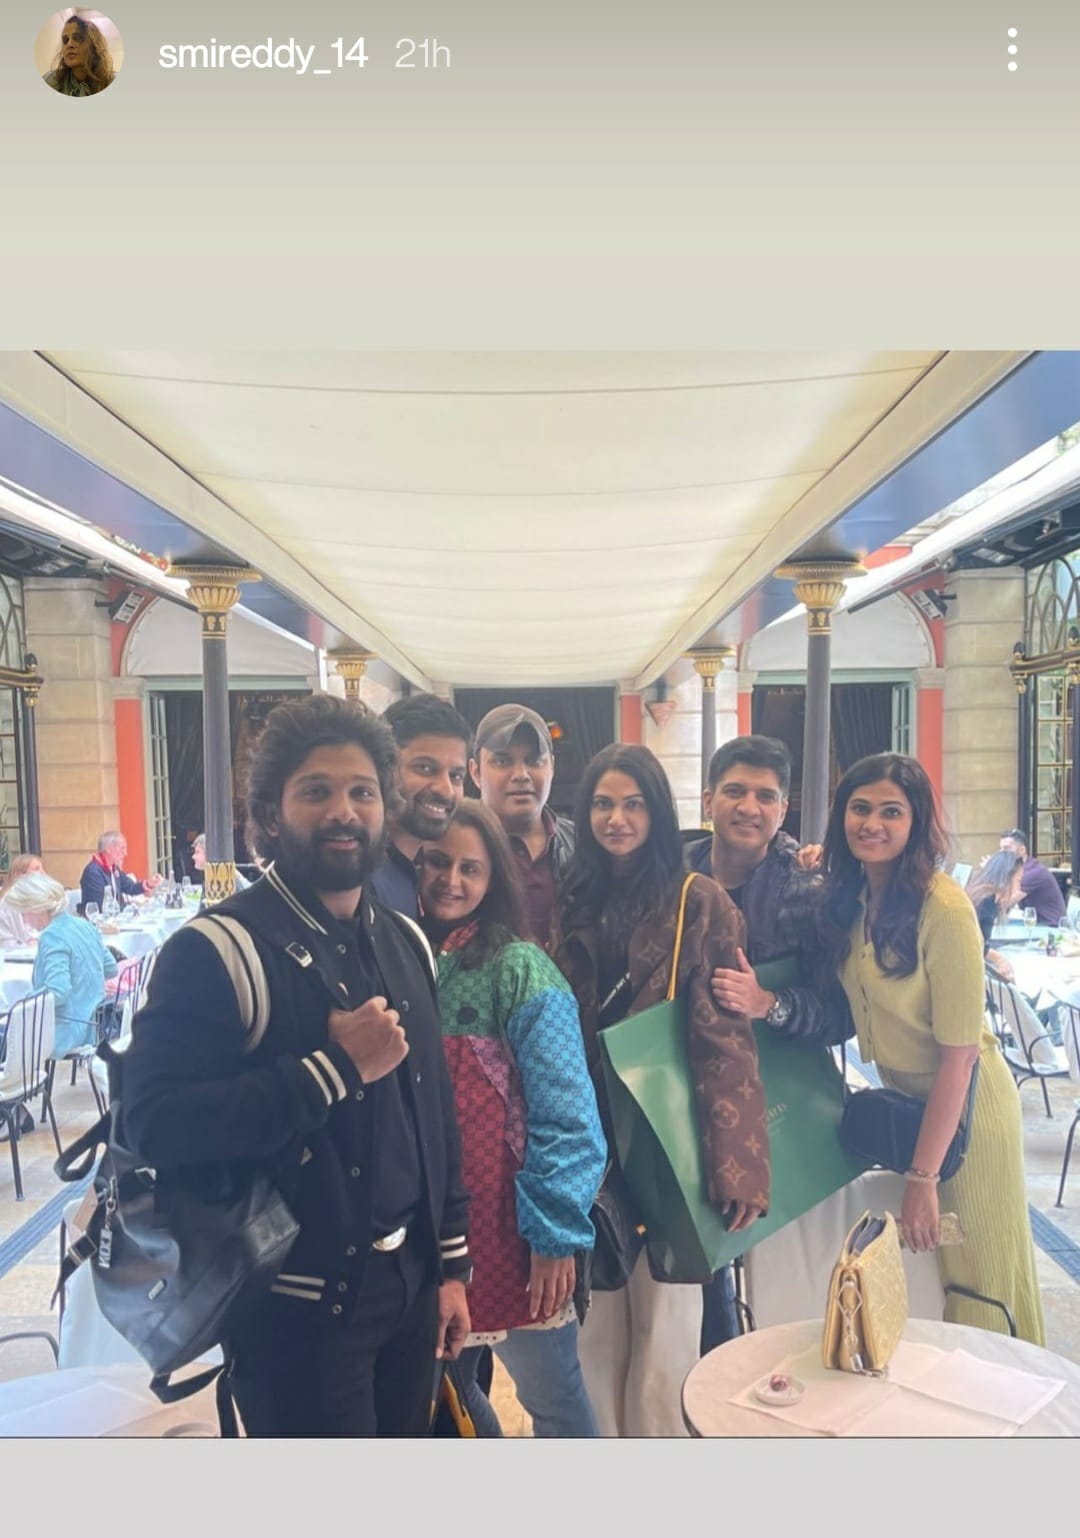 A picture of Allu Arjun and Sneha Reddy with friends in Europe, shared by one of their friends.